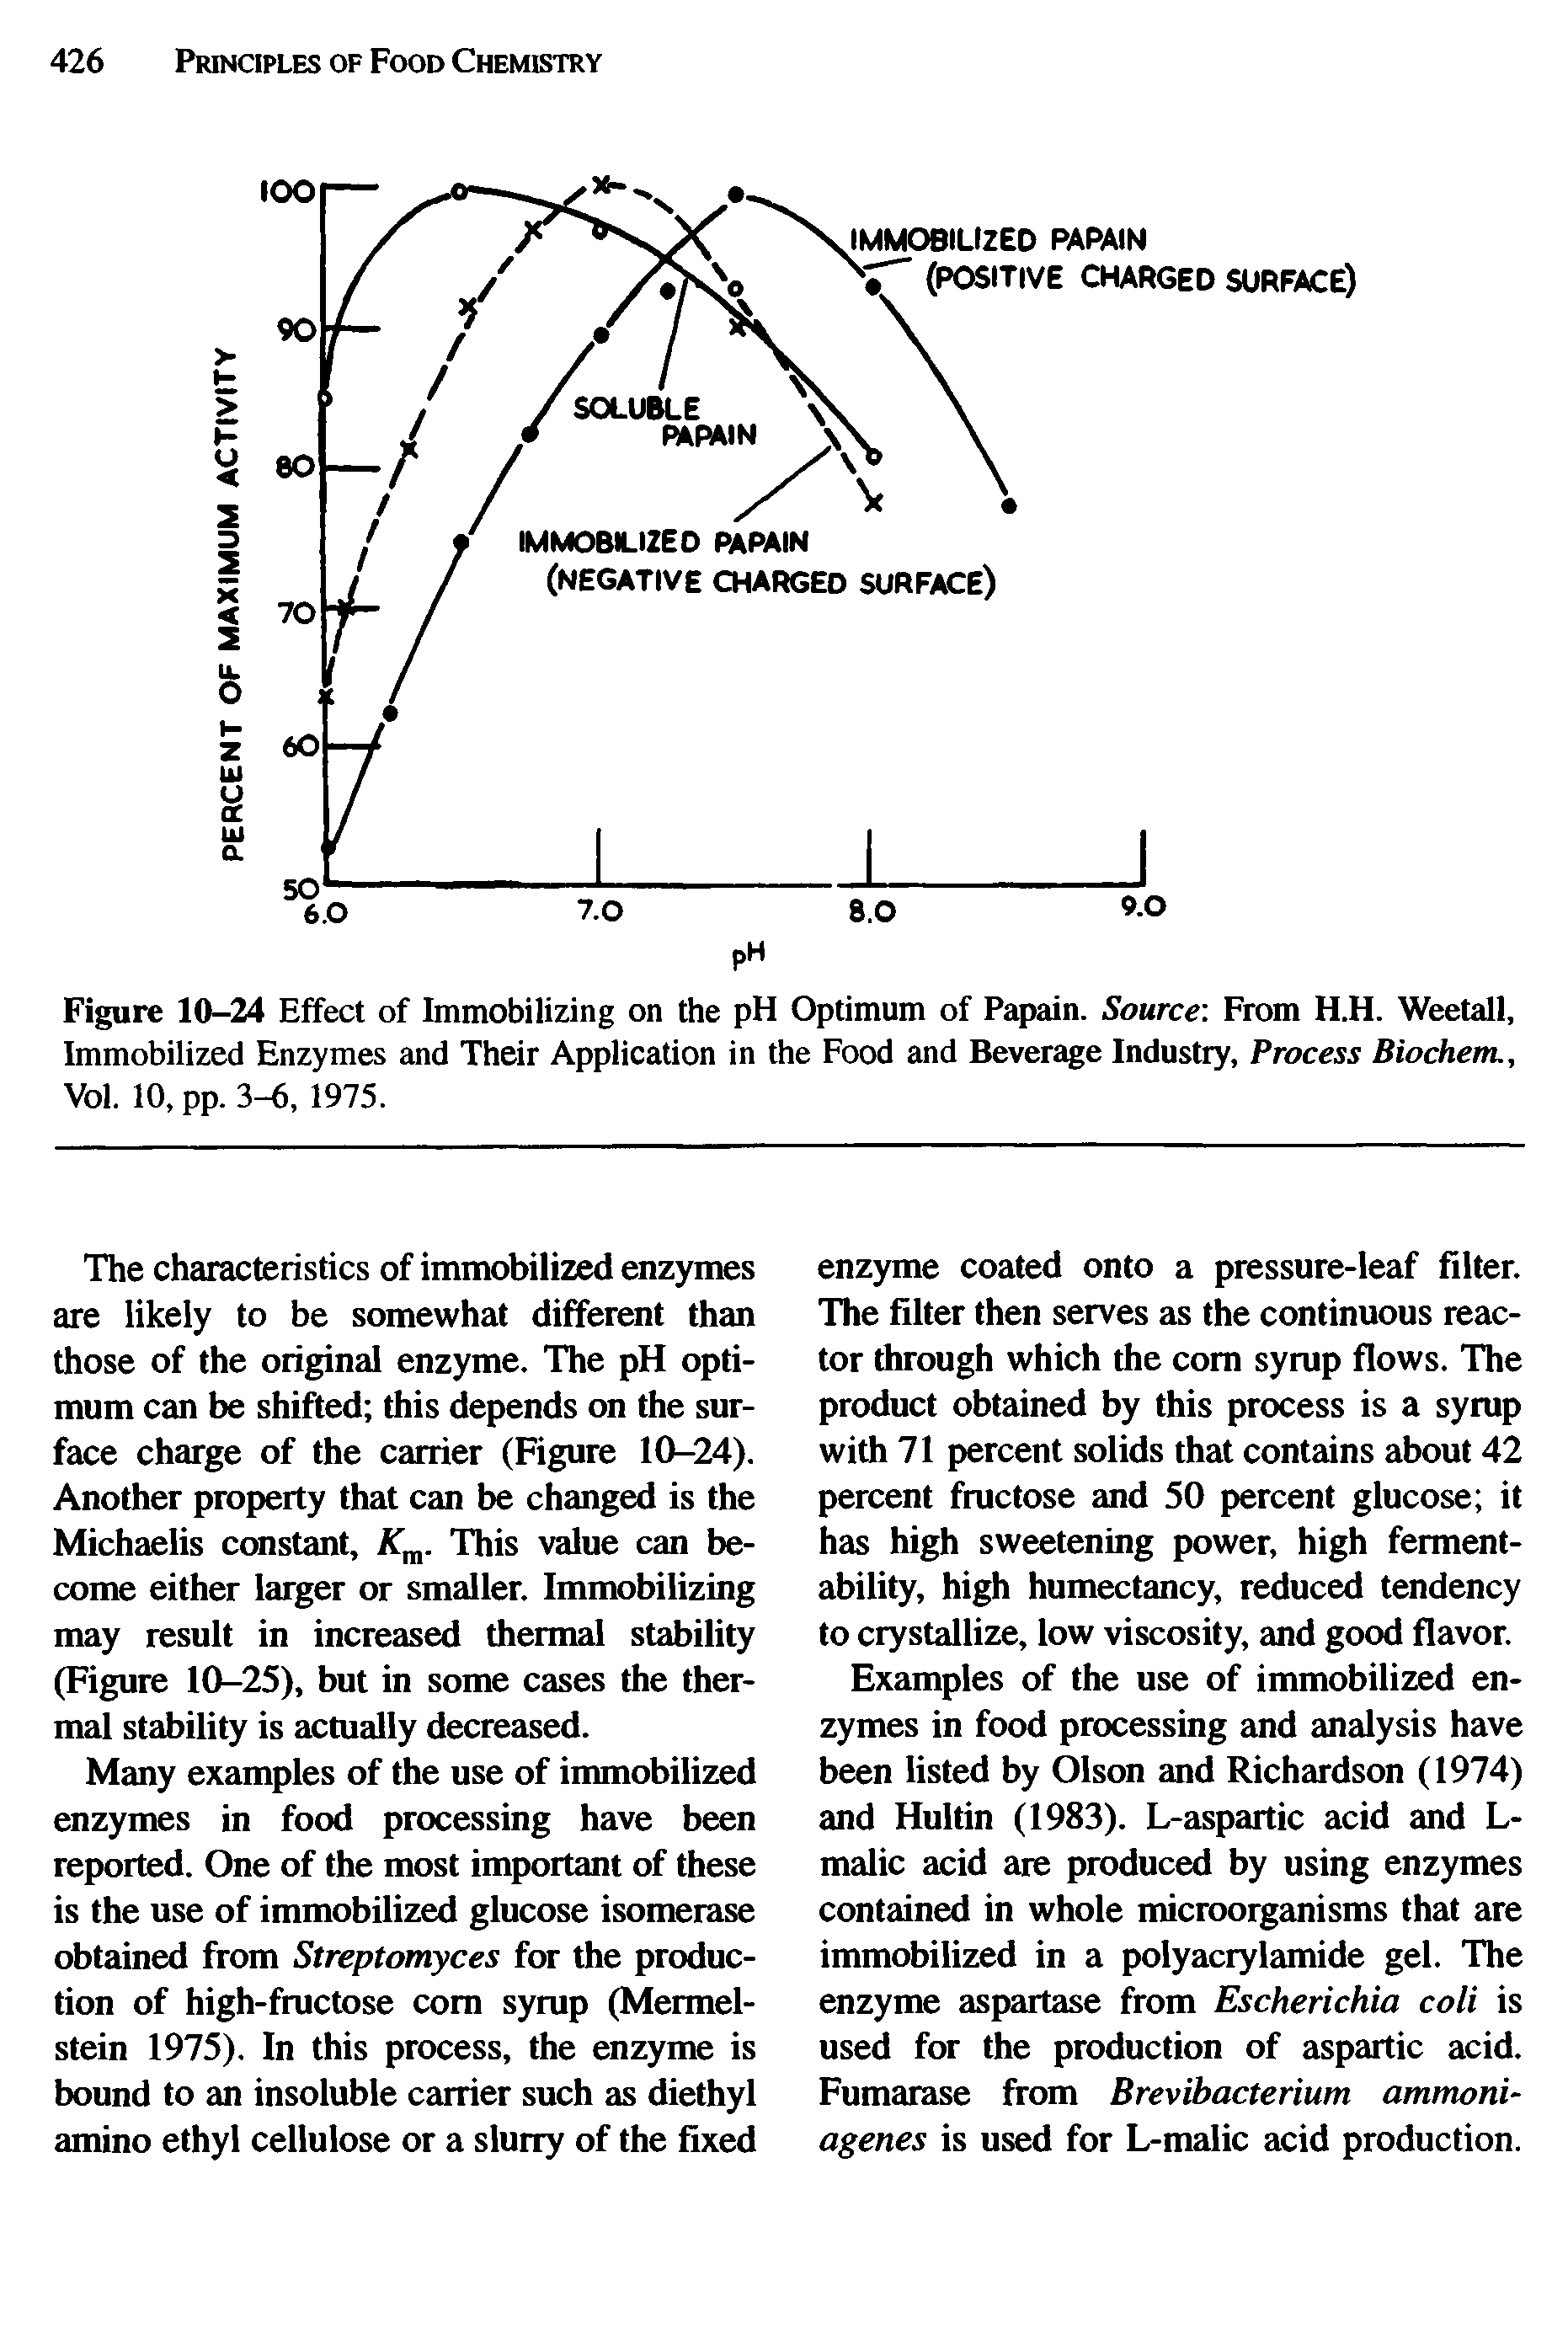 Figure 10-24 Effect of Immobilizing on the pH Optimum of Papain. Source From H.H. Weetall, Immobilized Enzymes and Their Application in the Food and Beverage Industry, Process Biochem., Vol. 10, pp. 3-6, 1975.